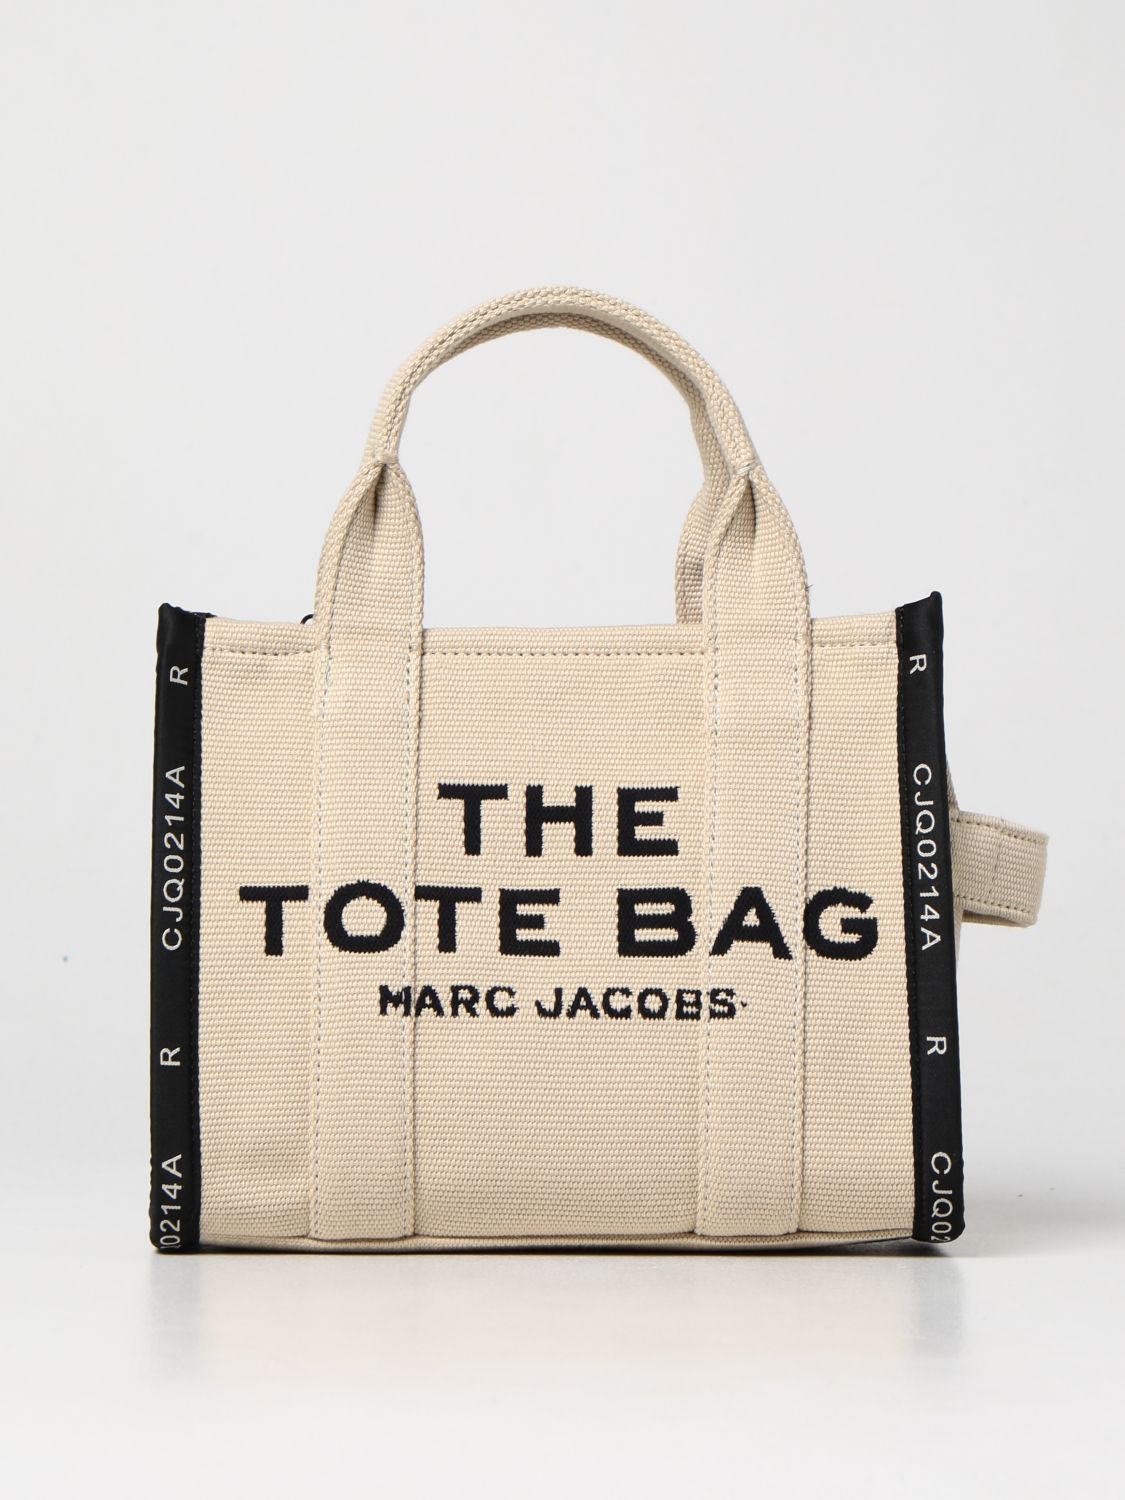 MARC JACOBS: The Tote Bag canvas bag - Beige | Marc Jacobs tote bags ...